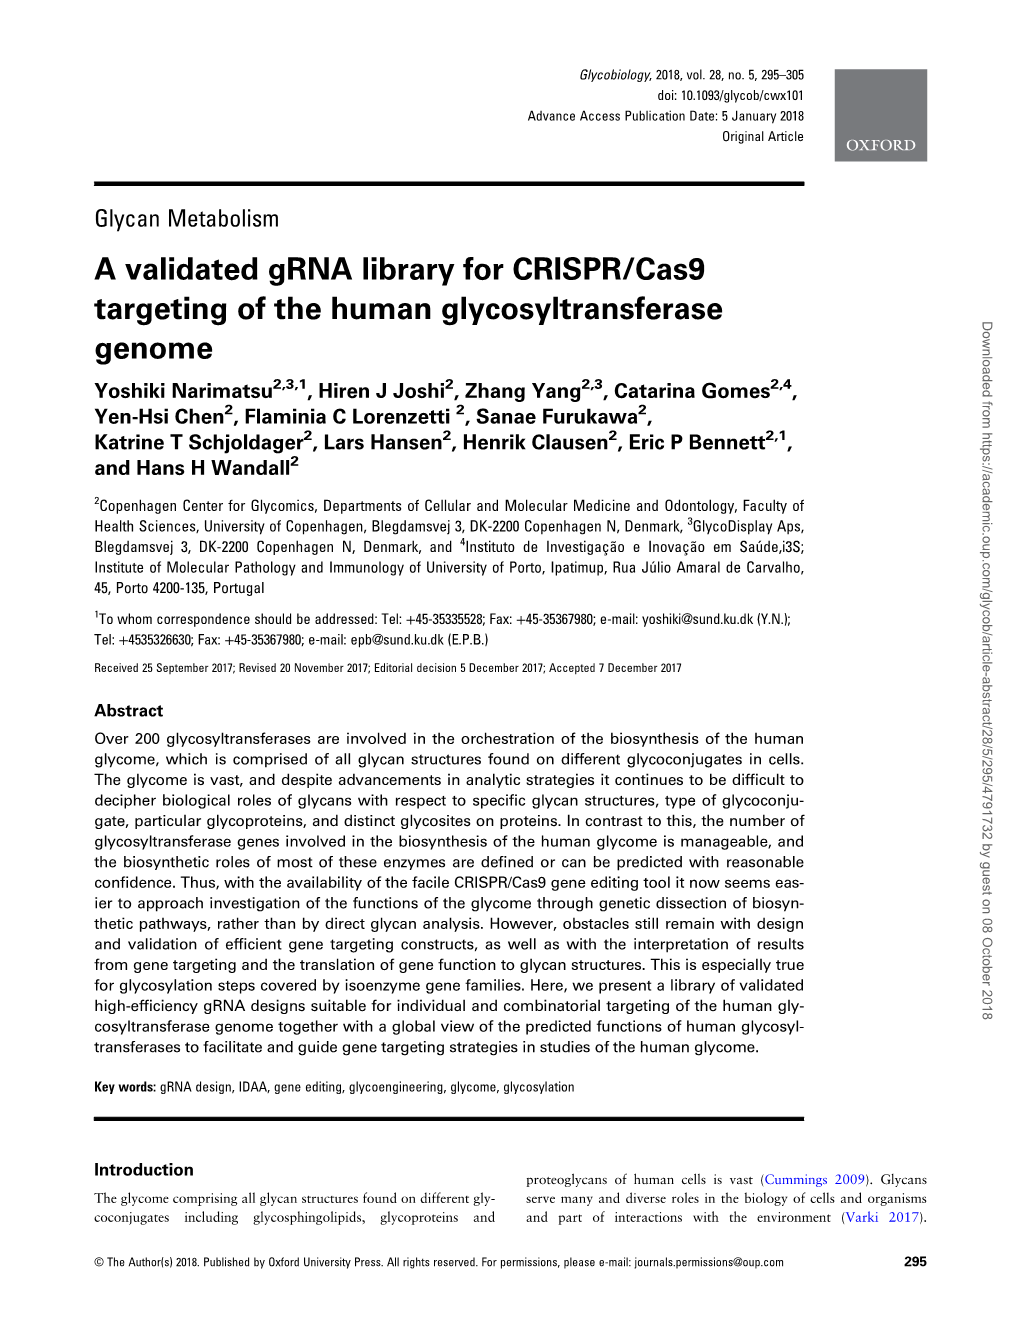 Glycan Metabolism a Validated Grna Library for CRISPR/Cas9